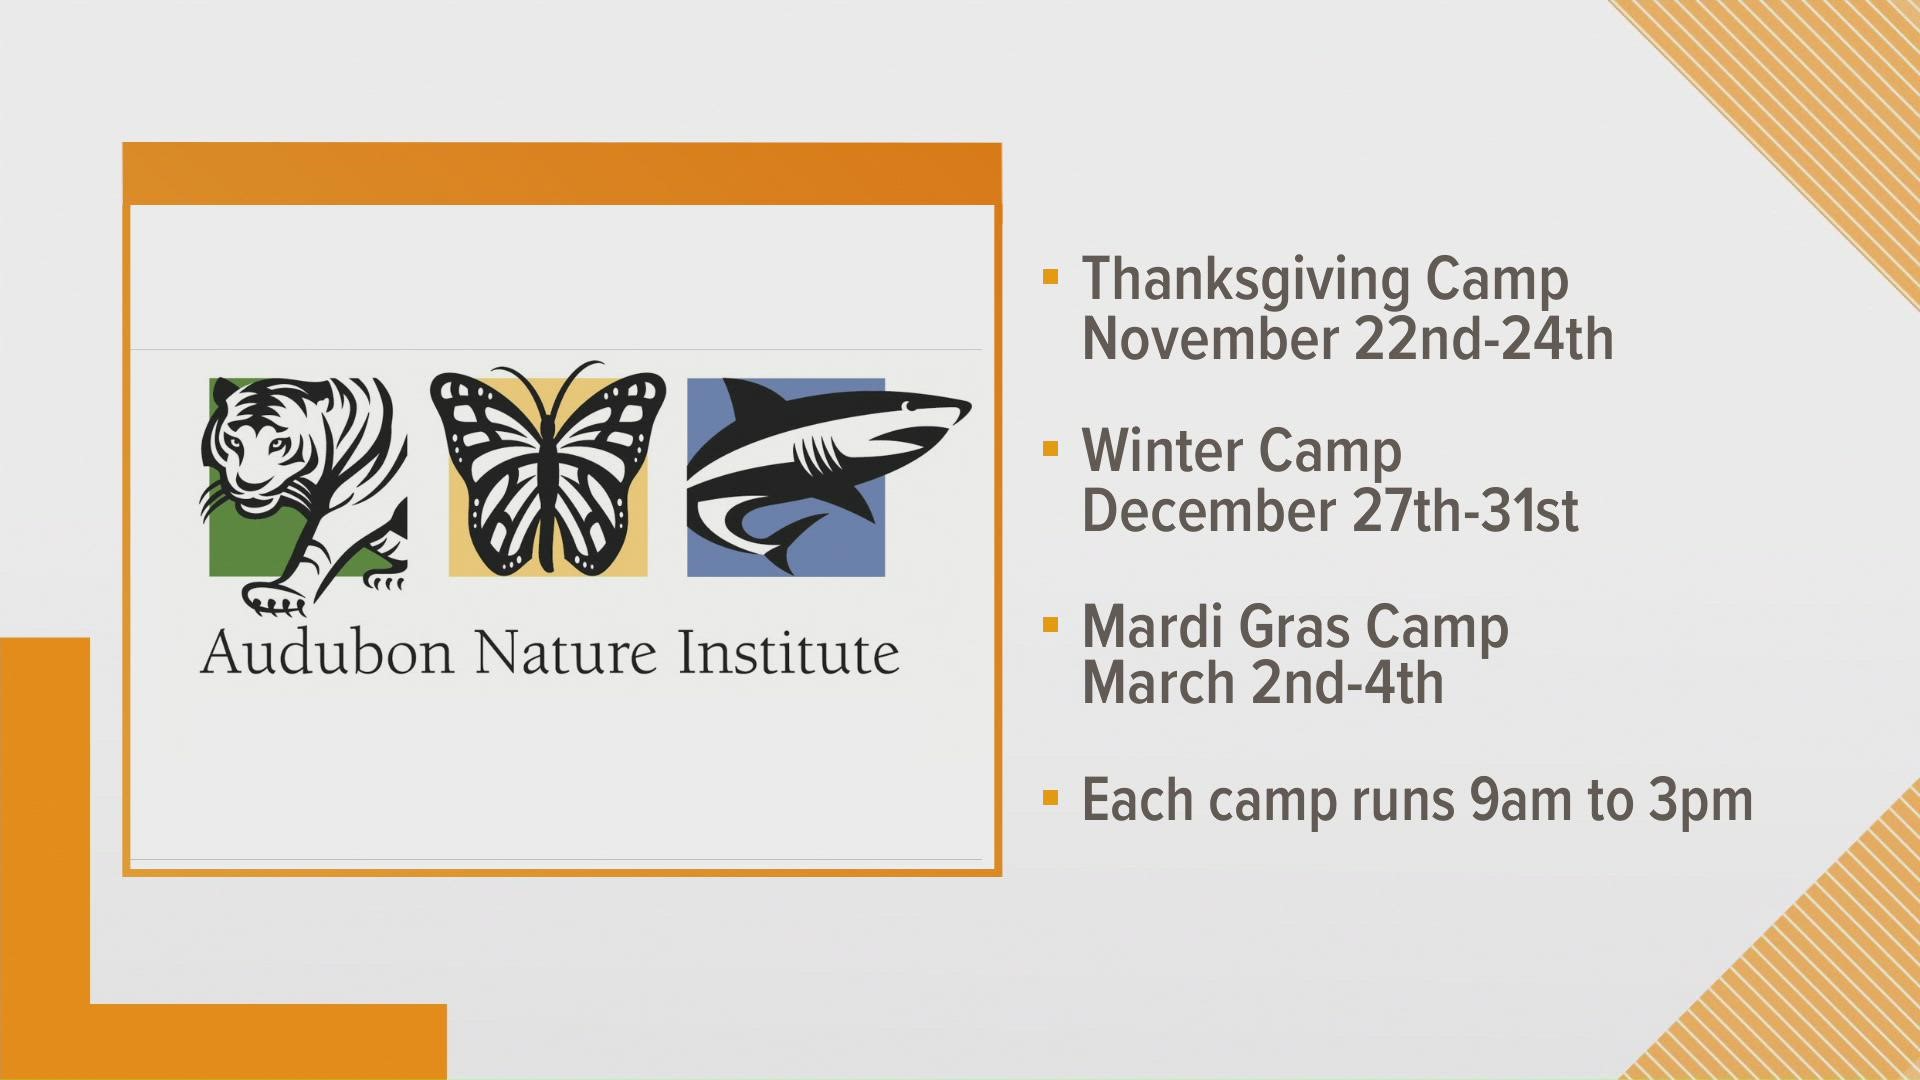 Registration is open now at audubonnatureinstitute.org/holiday-camps